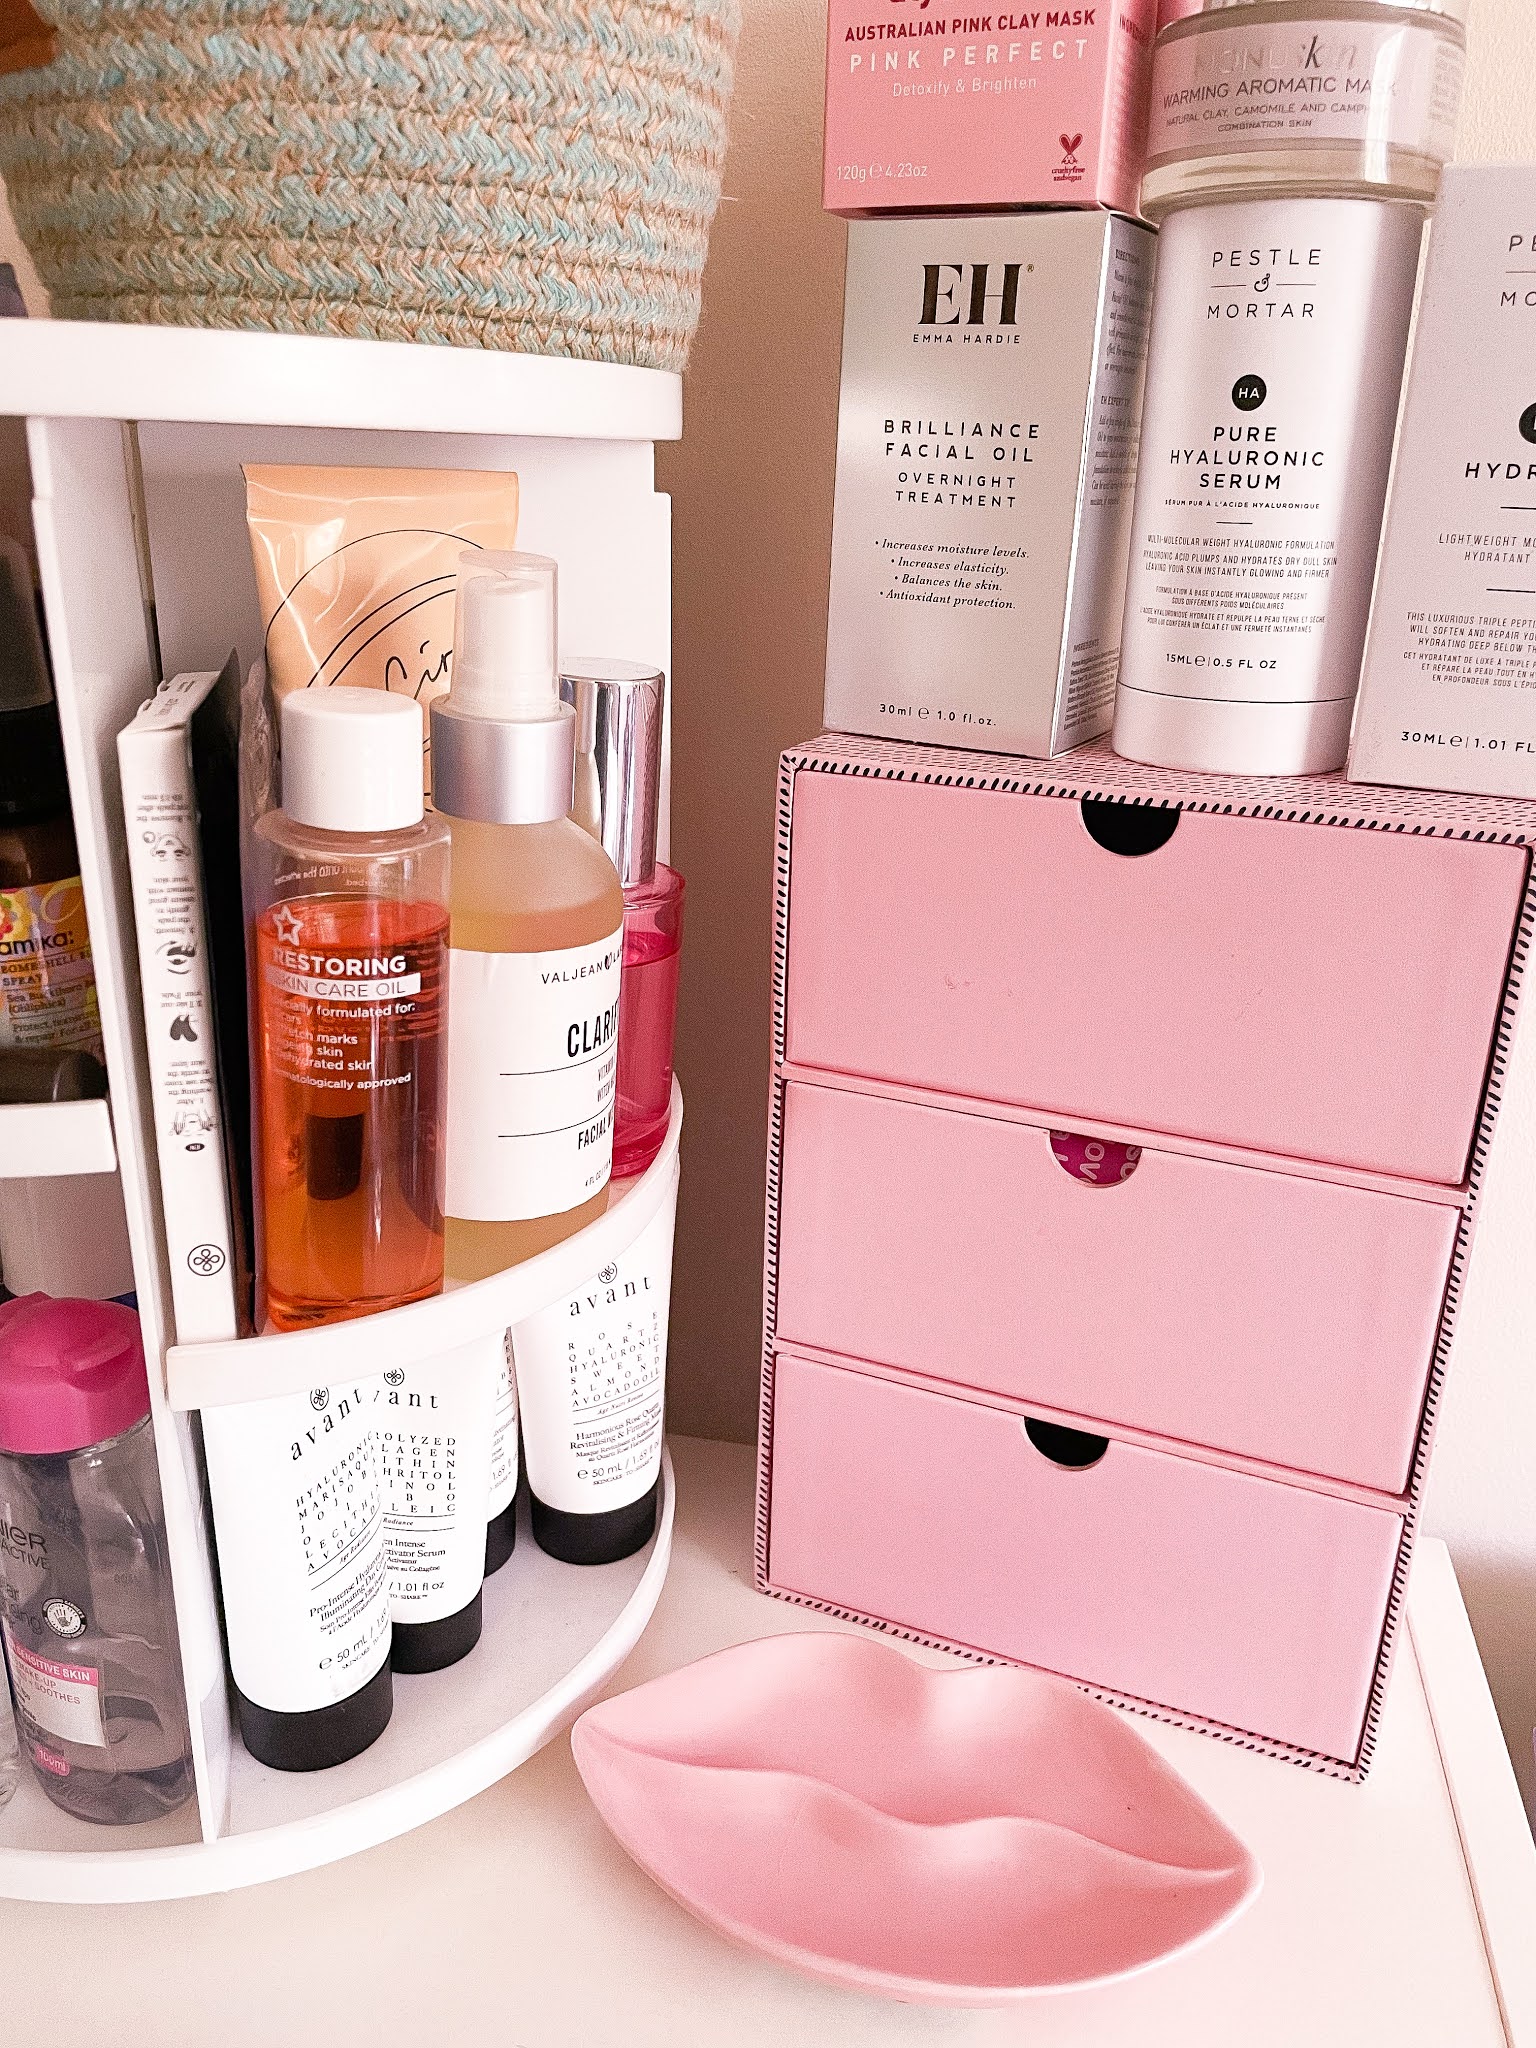 Best Skin-Care Organizers For Storing Products